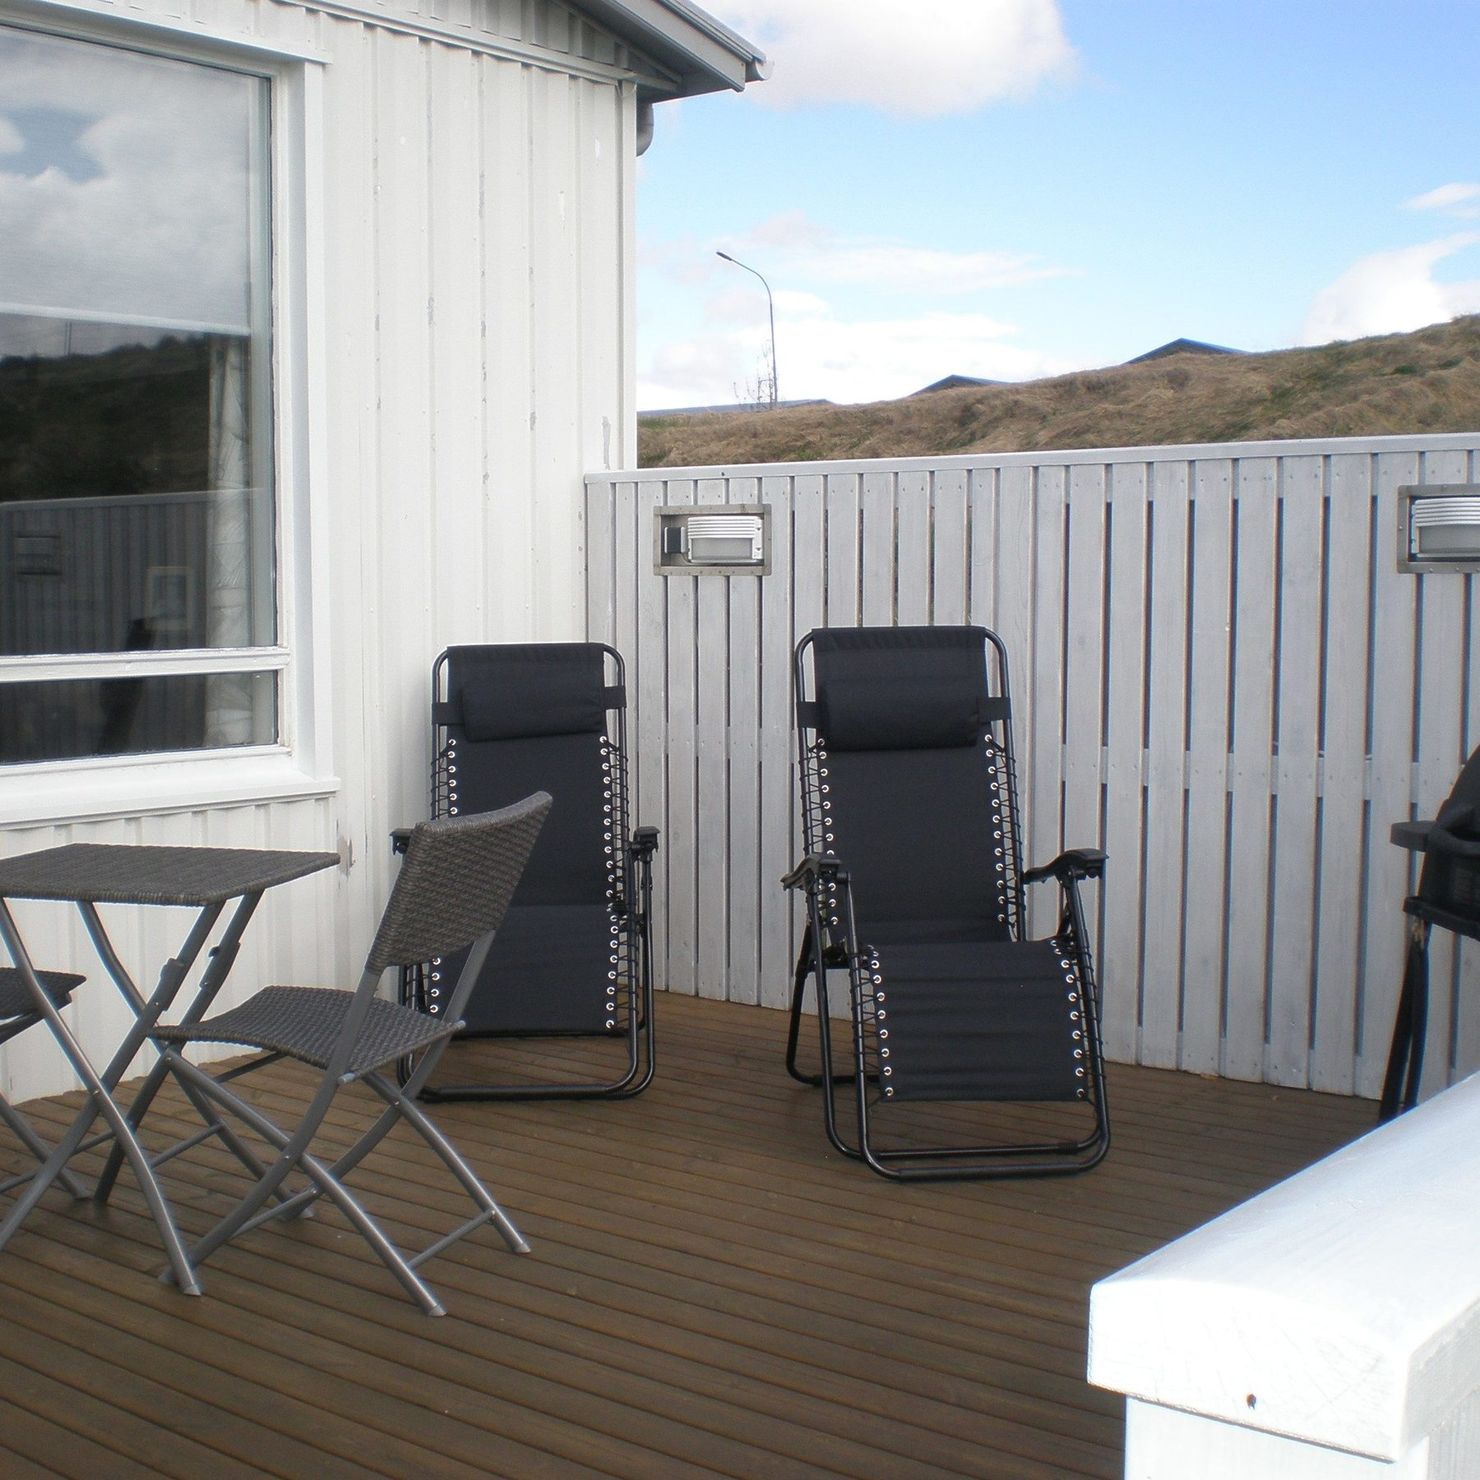 On the sheltered terrace there is garden furniture and a gas grill